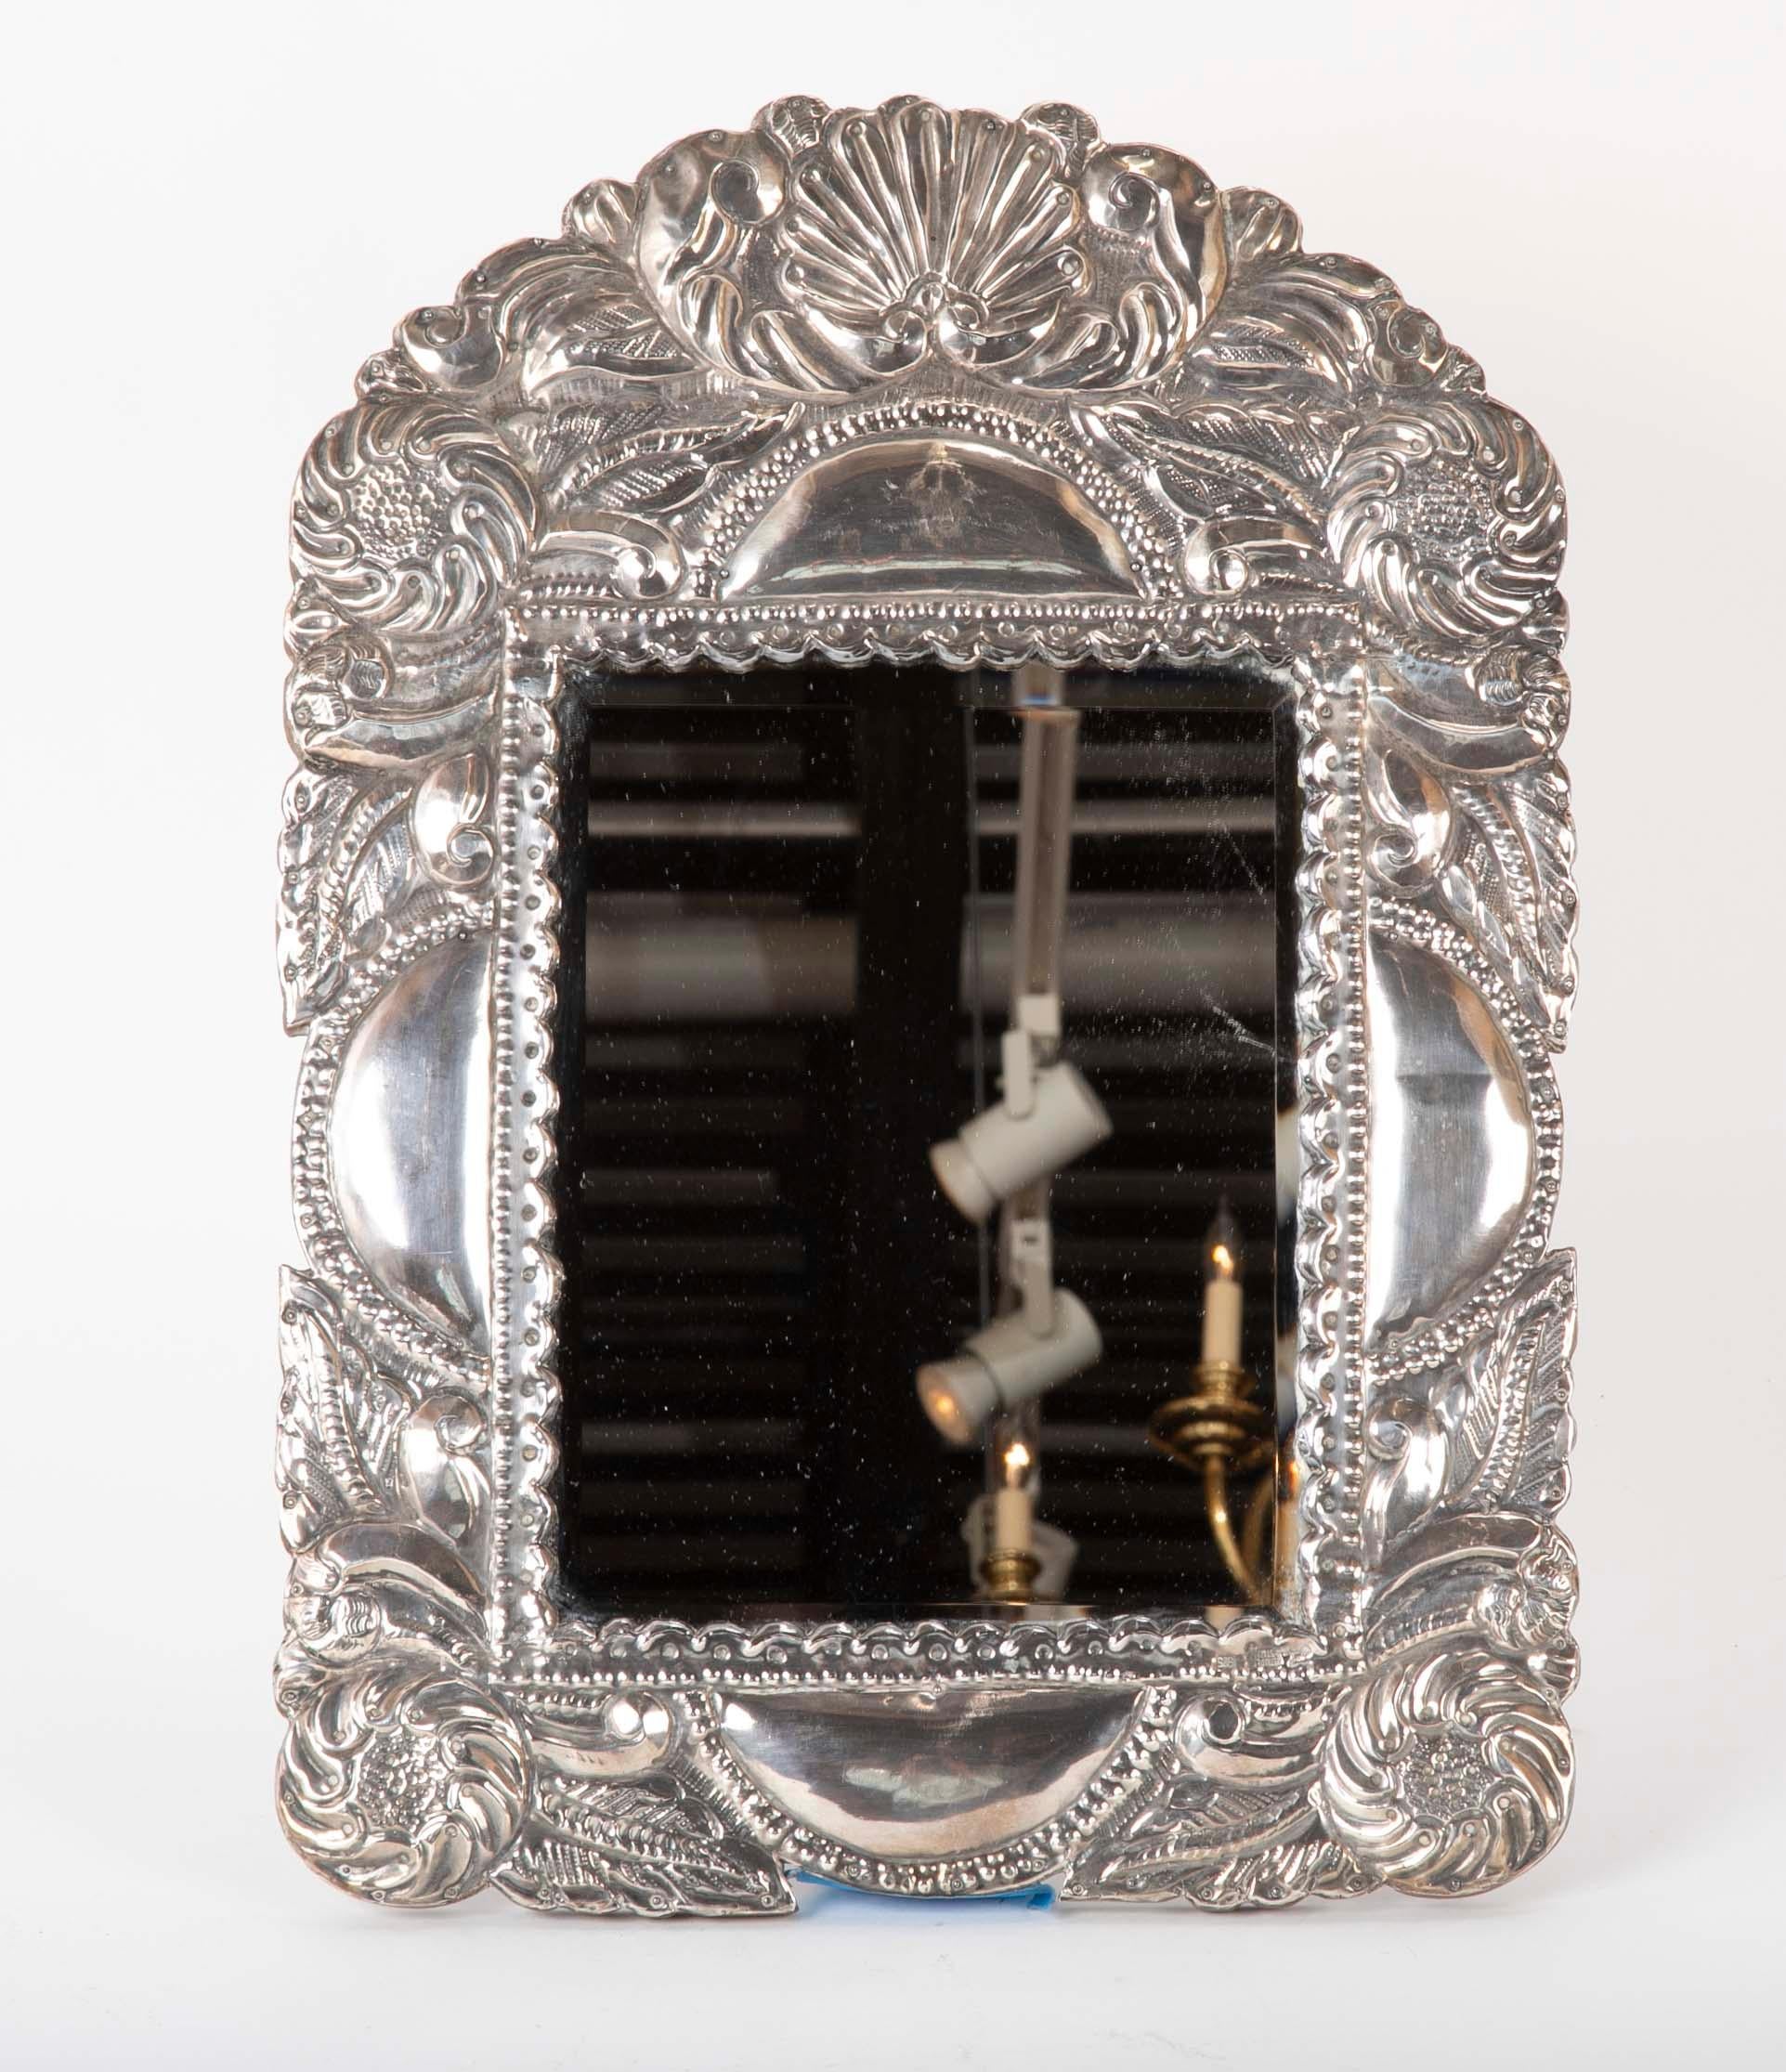 A Peruvian silver repousse picture frame or table top mirror. Hand worked in the Spanish Colonial style decorated in floral and shell motifs. This is a wonderful looking and distinct vanity mirror that will also make a great frame for that favorite